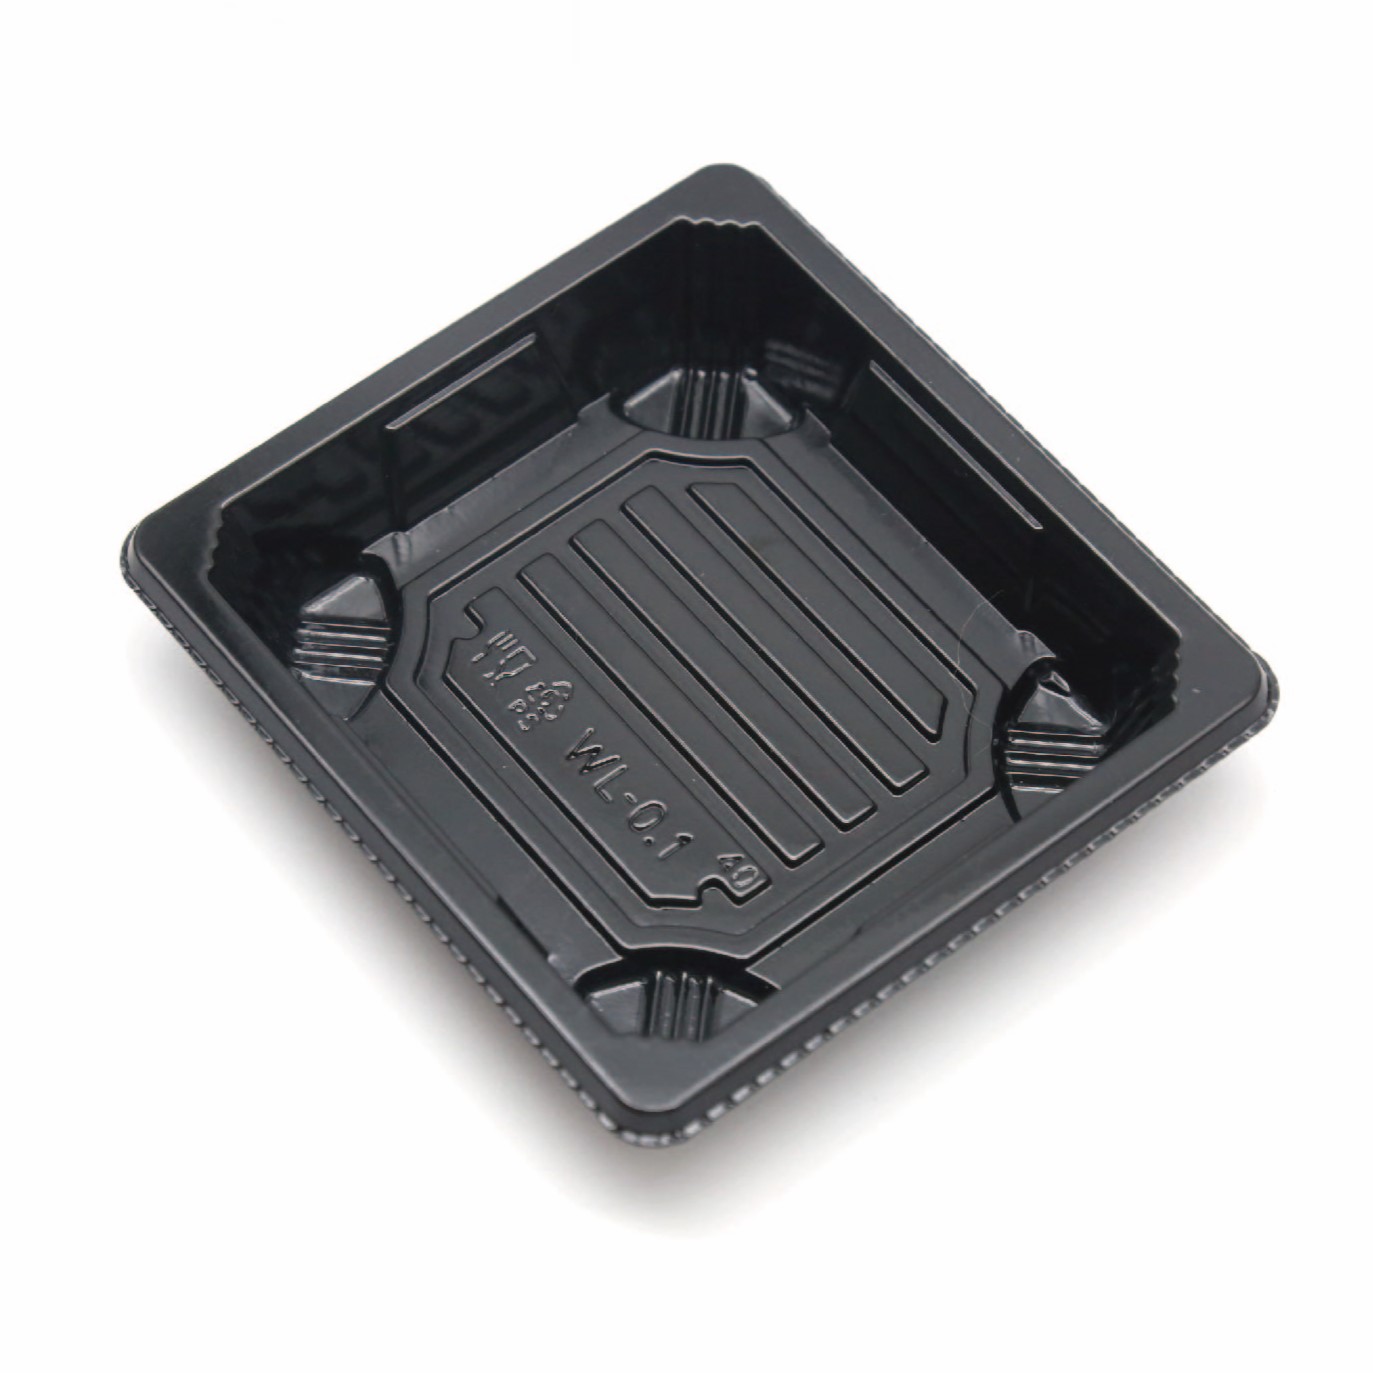 The material used for sushi tray WL-0.1 is PS.